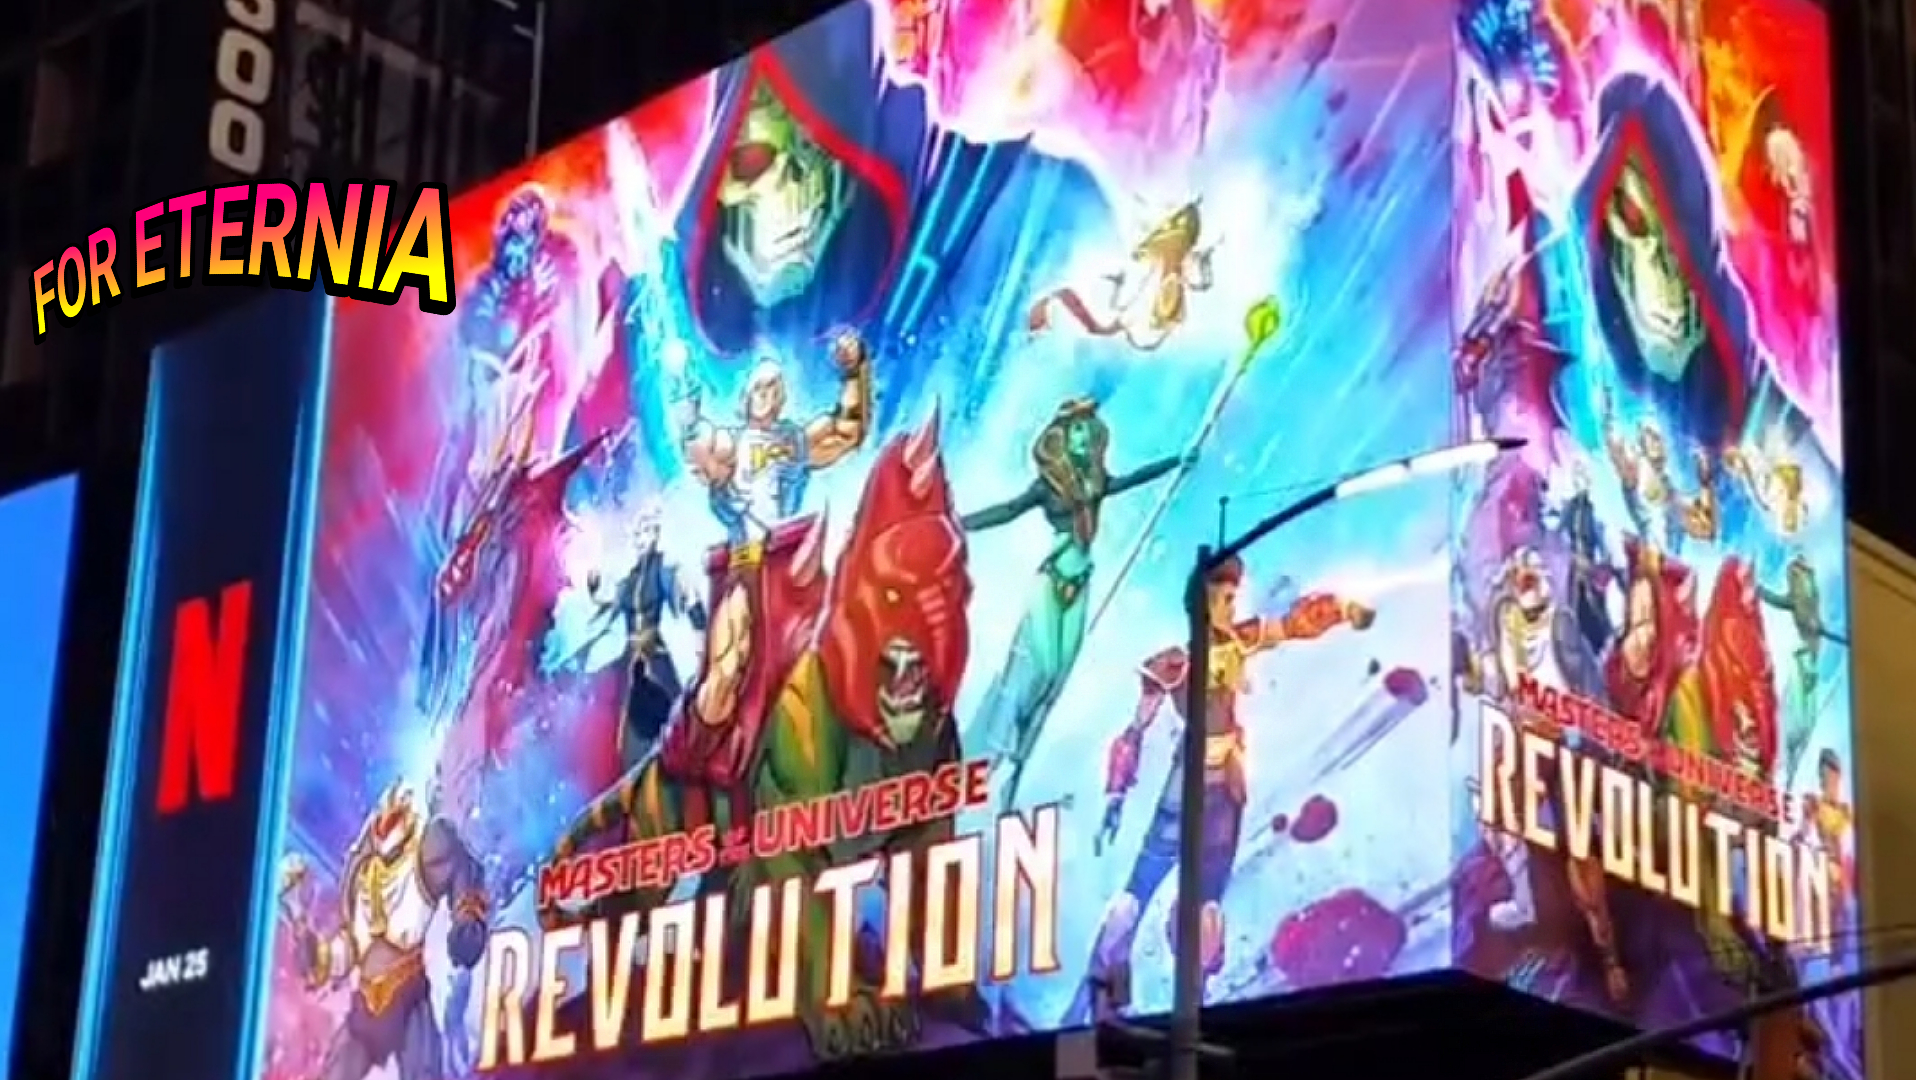 ”Masters of the Universe: Revolution” Promotional Billboard spotted in New York City